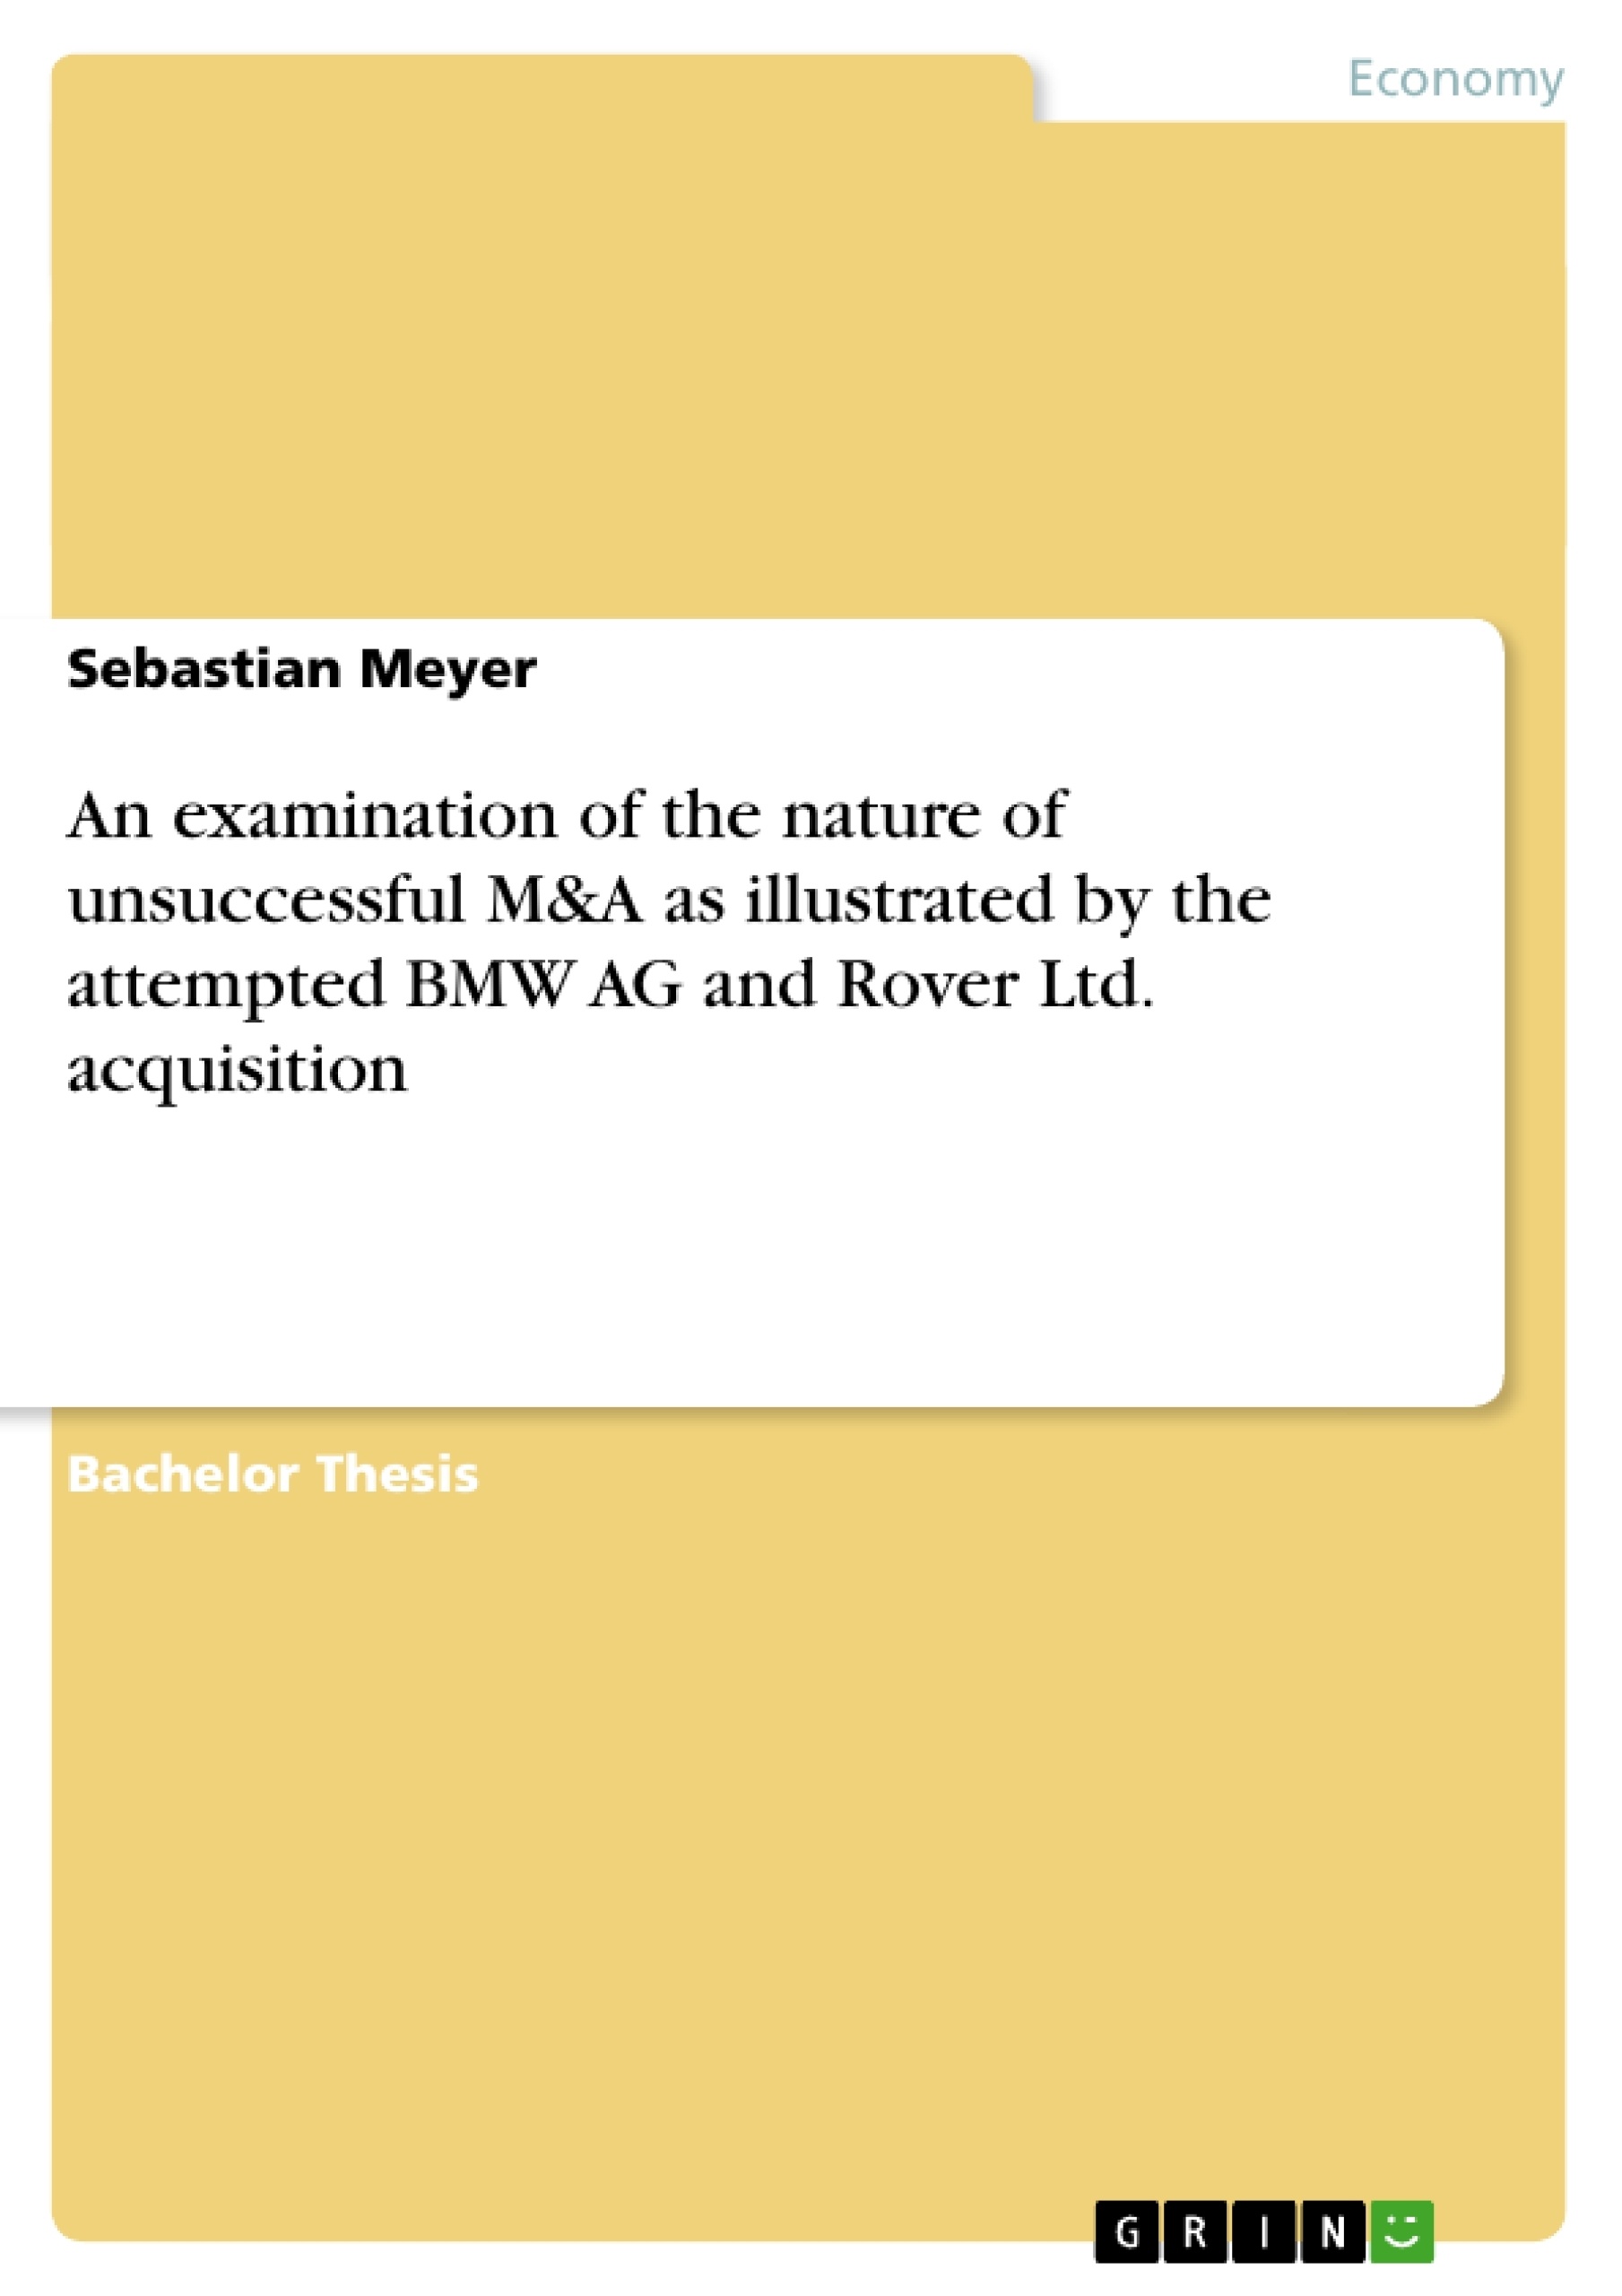 Titre: An examination of the nature of unsuccessful M&A as illustrated by the attempted BMW AG and Rover Ltd. acquisition